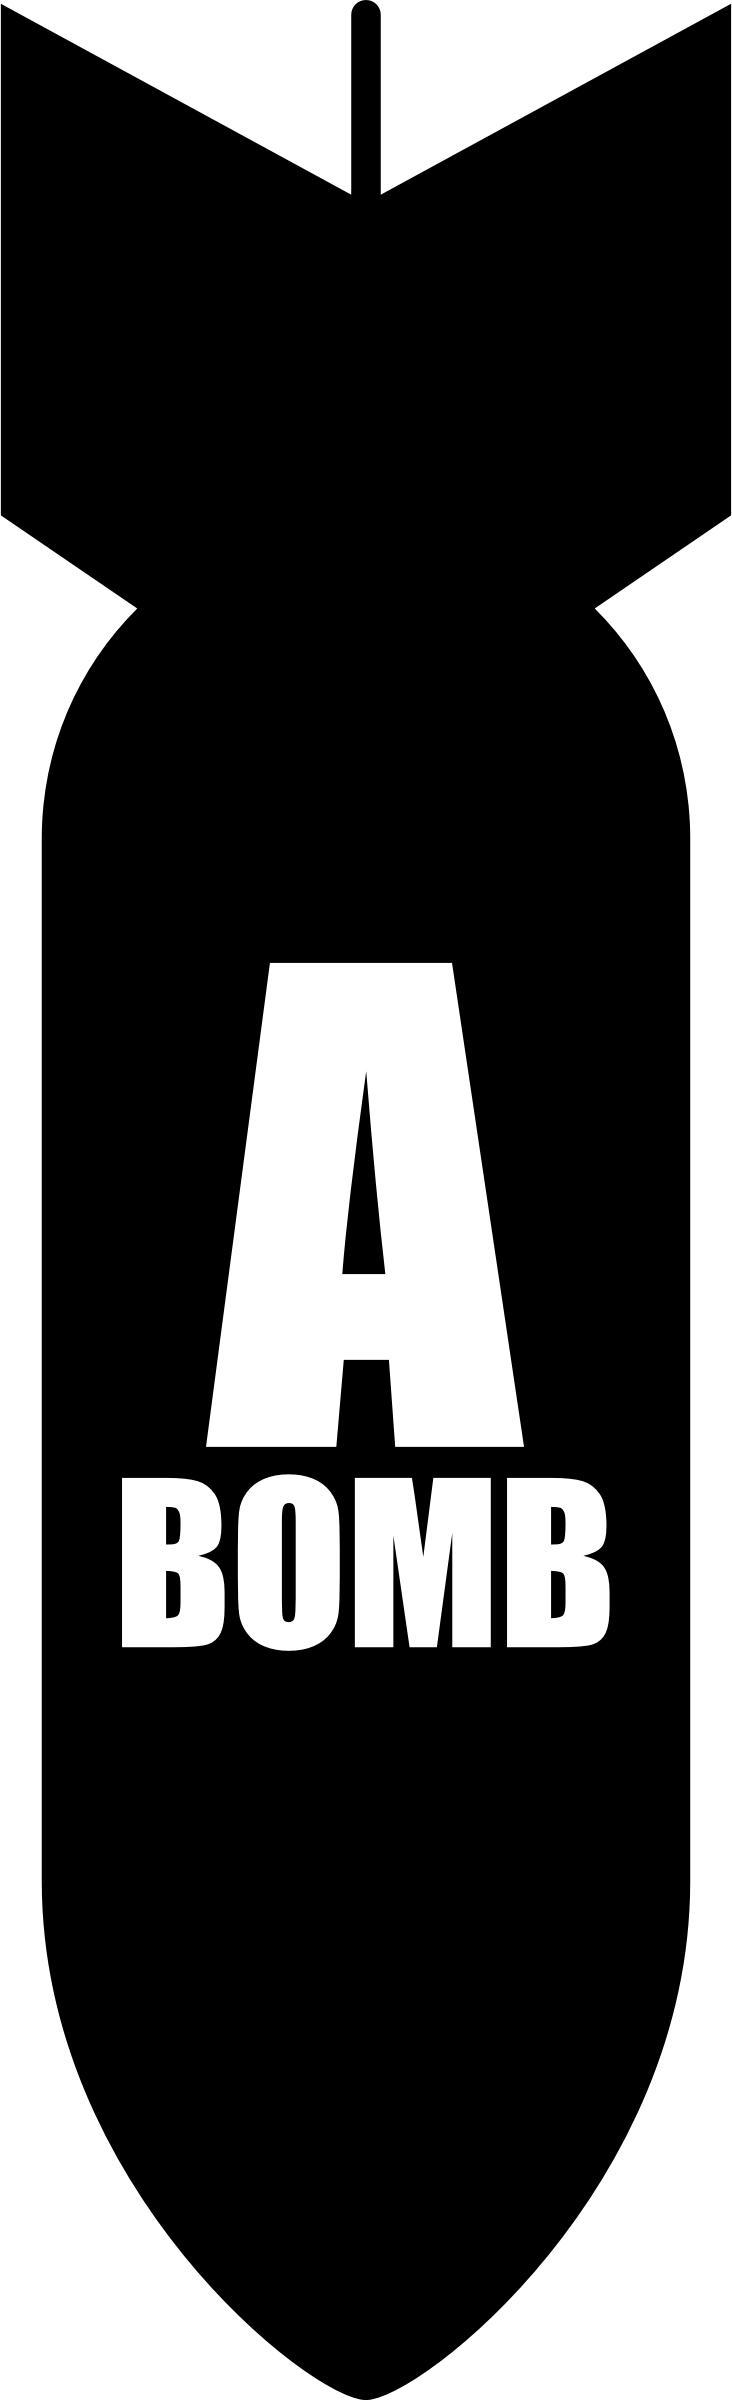 A-bomb by Rones png transparent